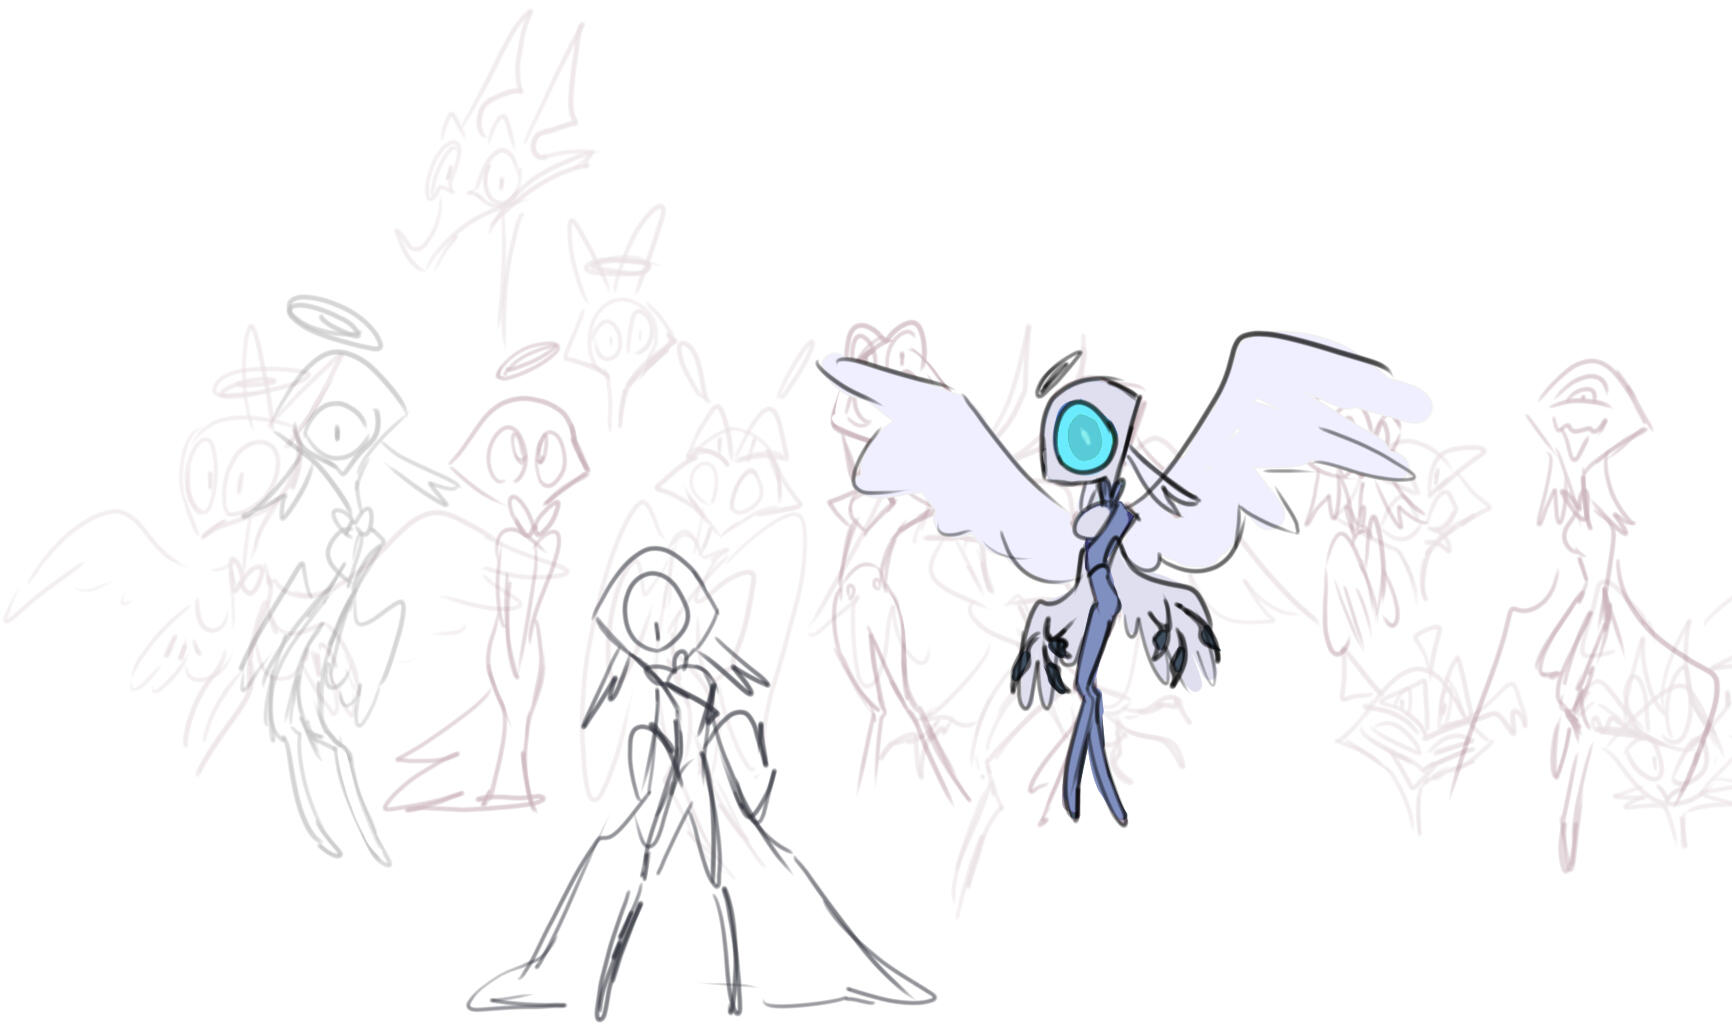 Was trying to design a Hazbinsona, this was the progress made. I am NOT mean enough to be a sinner so silly angel creature it is